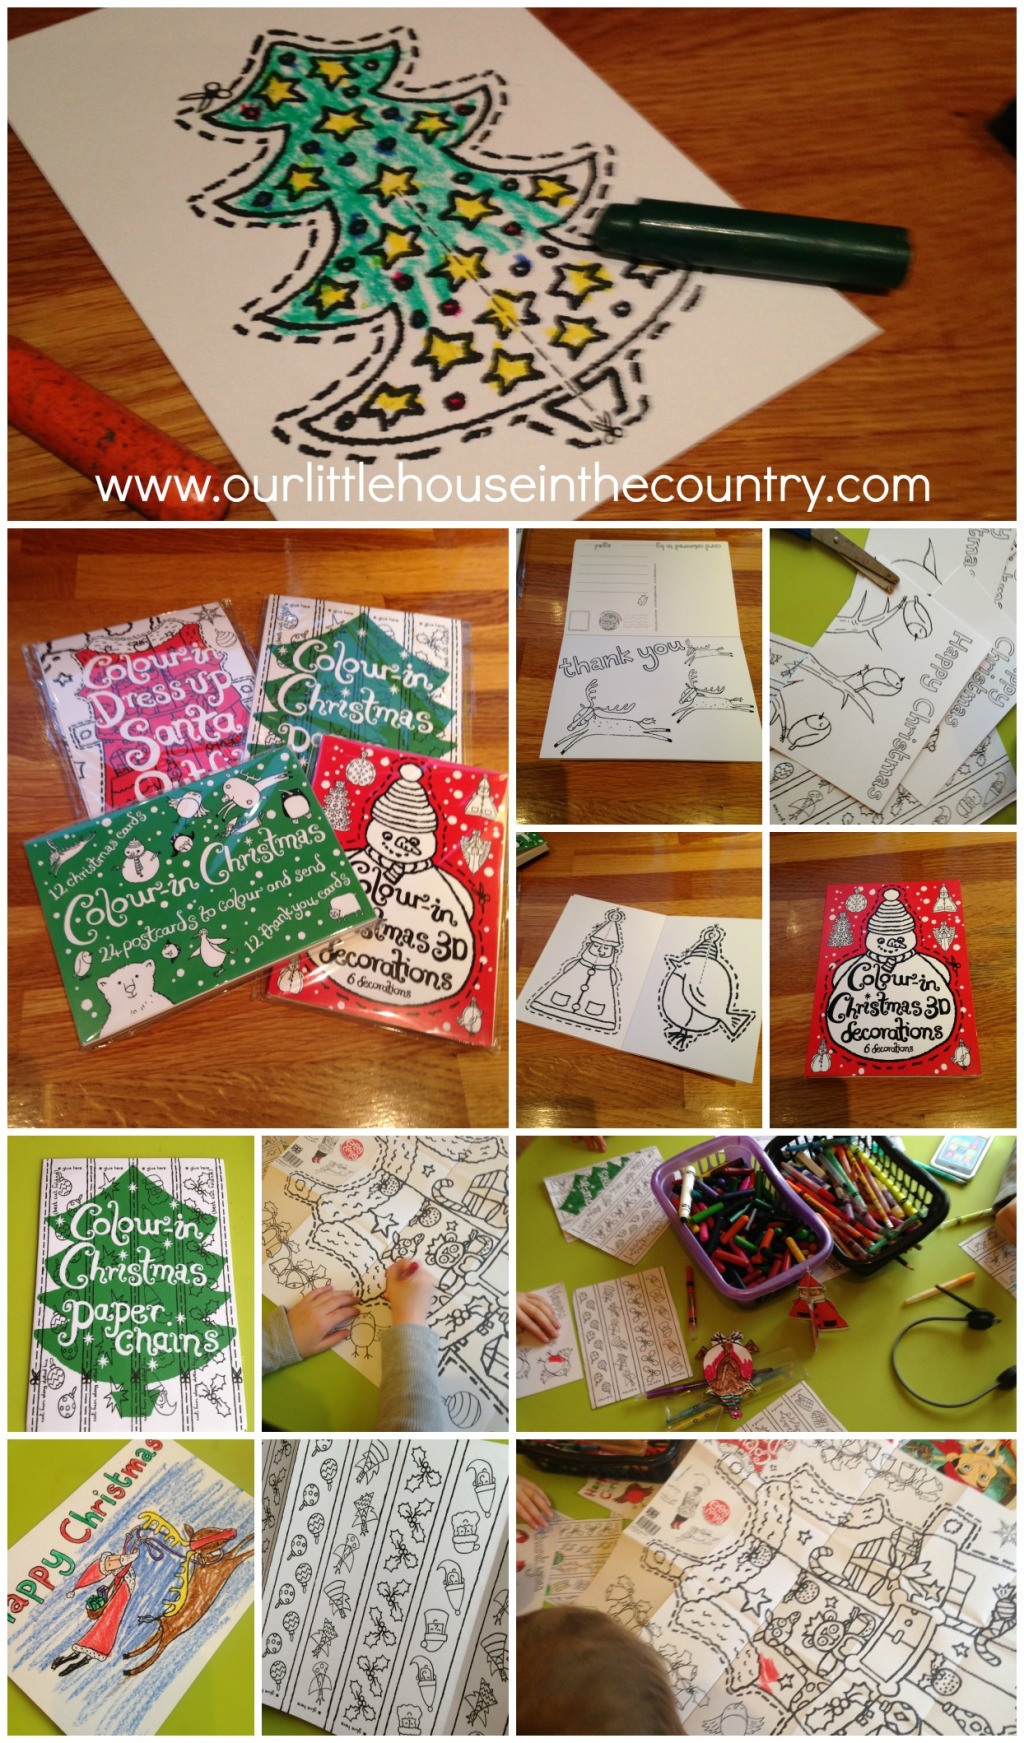 Christmas Card and Decoration Making Kits by EggNogg (Review)